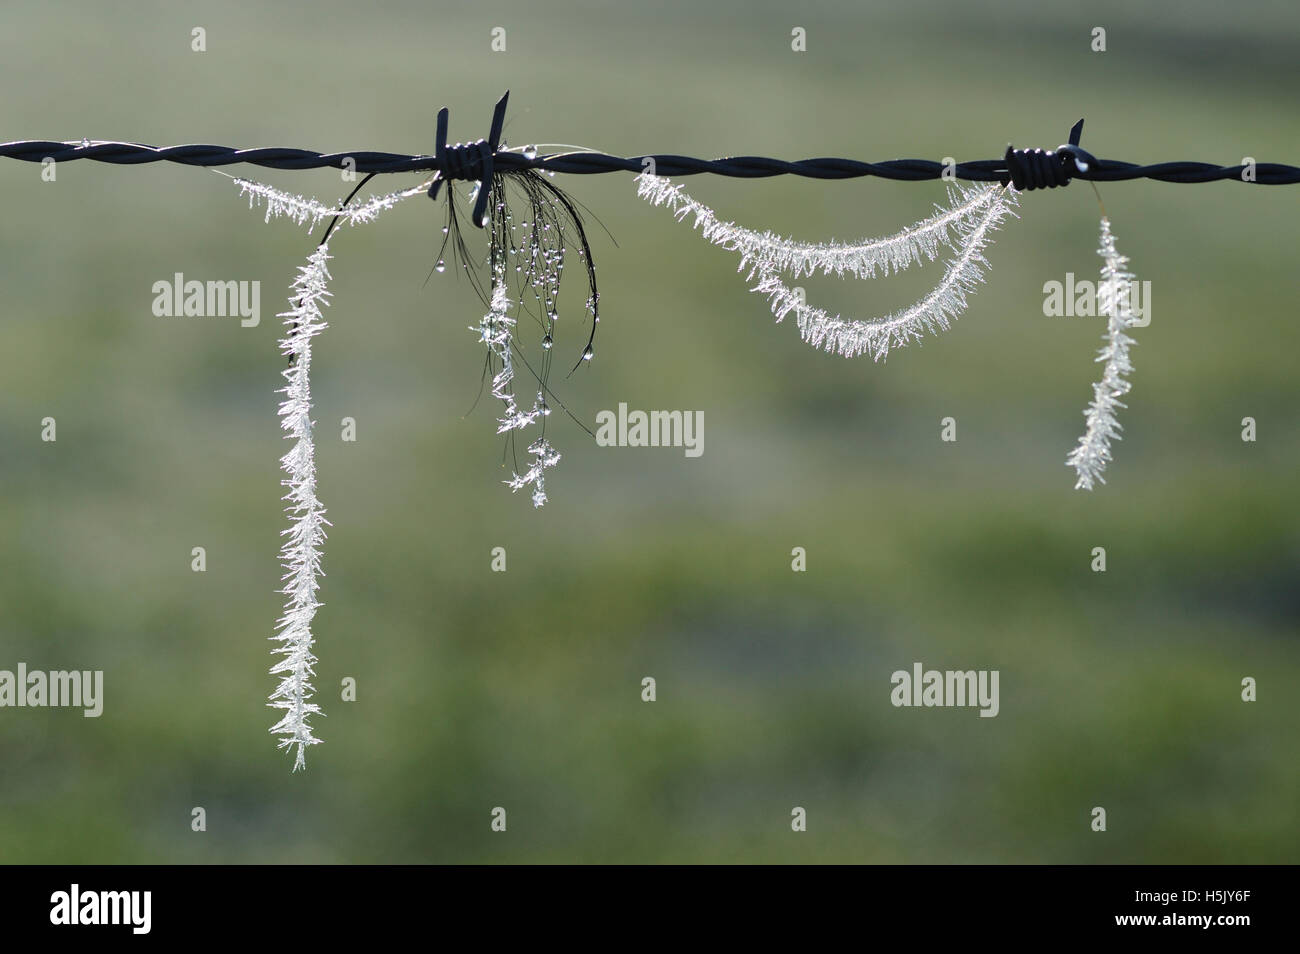 Horse-hair on barbed wire fence Stock Photo